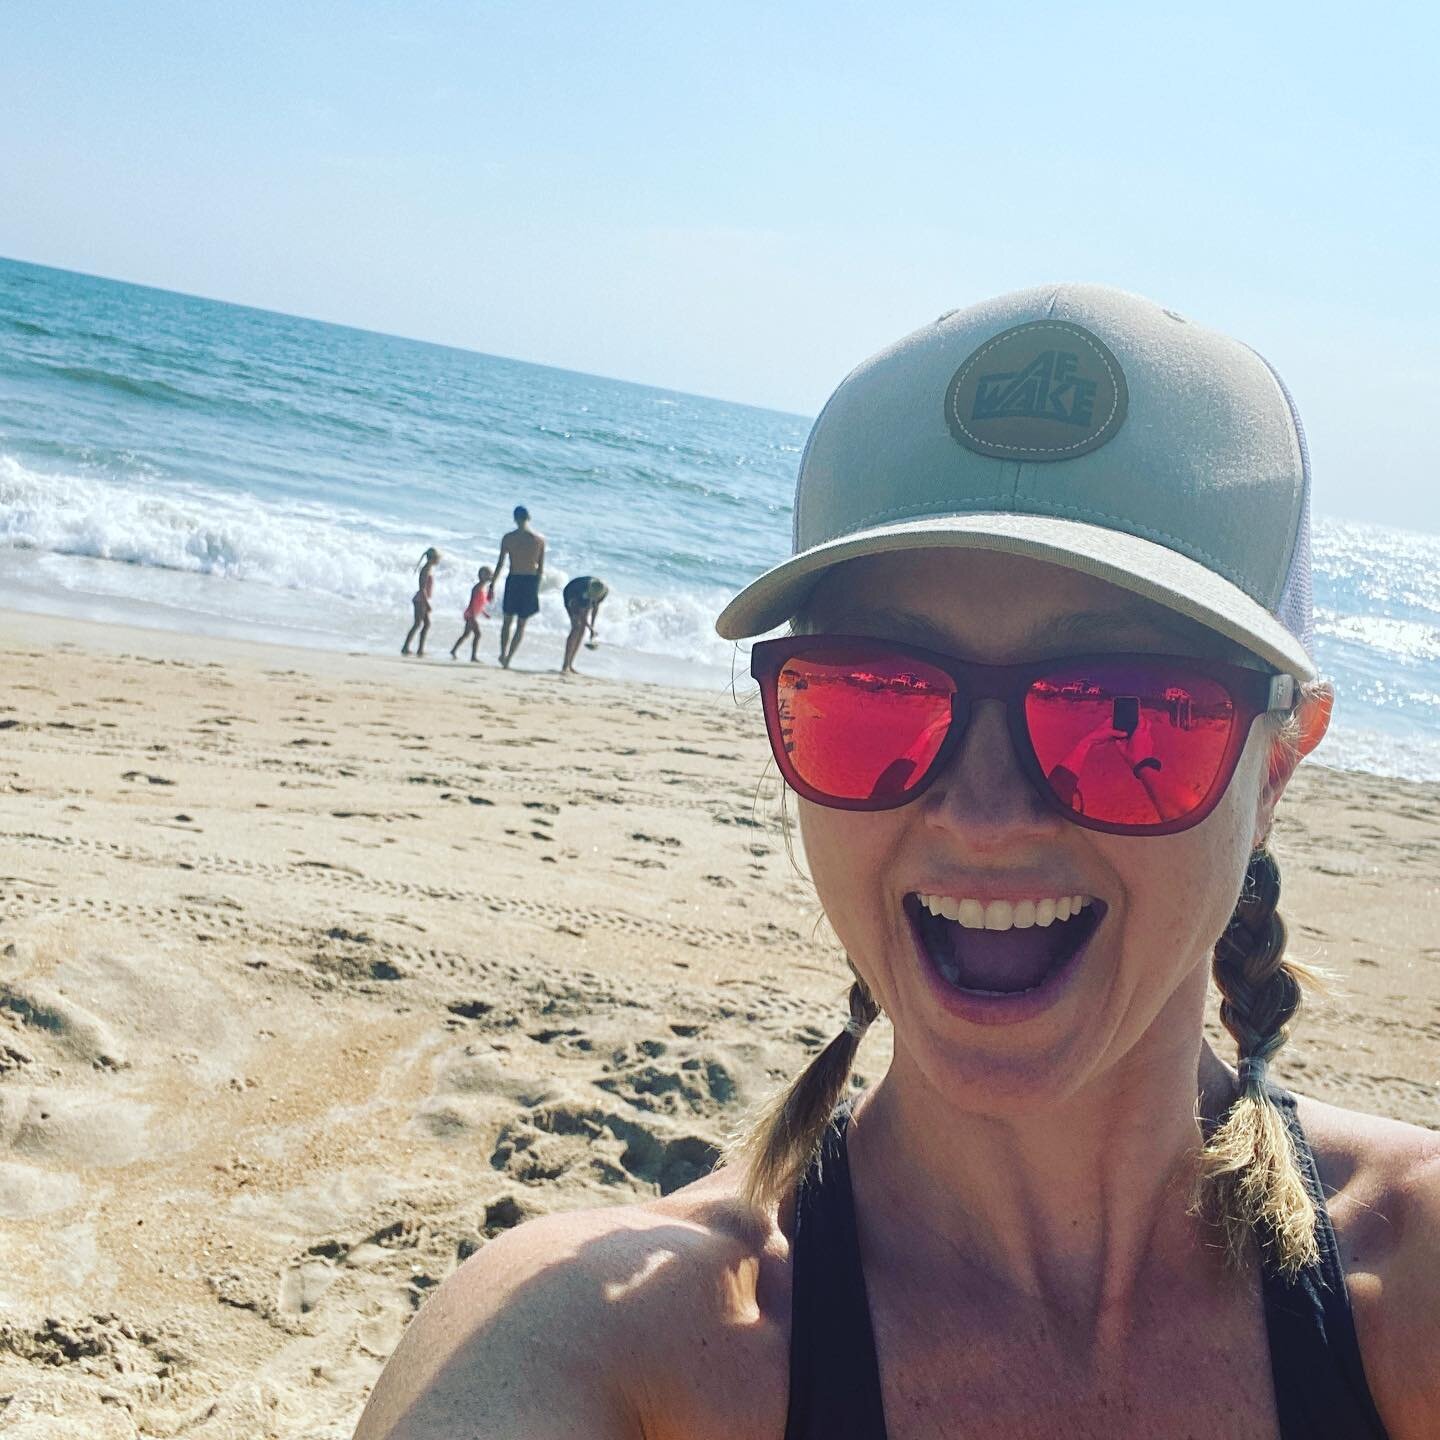 Ode to our final summer 2020 beach week:
Thank you virtual work for allowing us to travel. But damned you for getting in the way. The beach waves are mighty and slam sand into bodies. Connecting with nature is a win any day. @sunbum sunscreen you sav